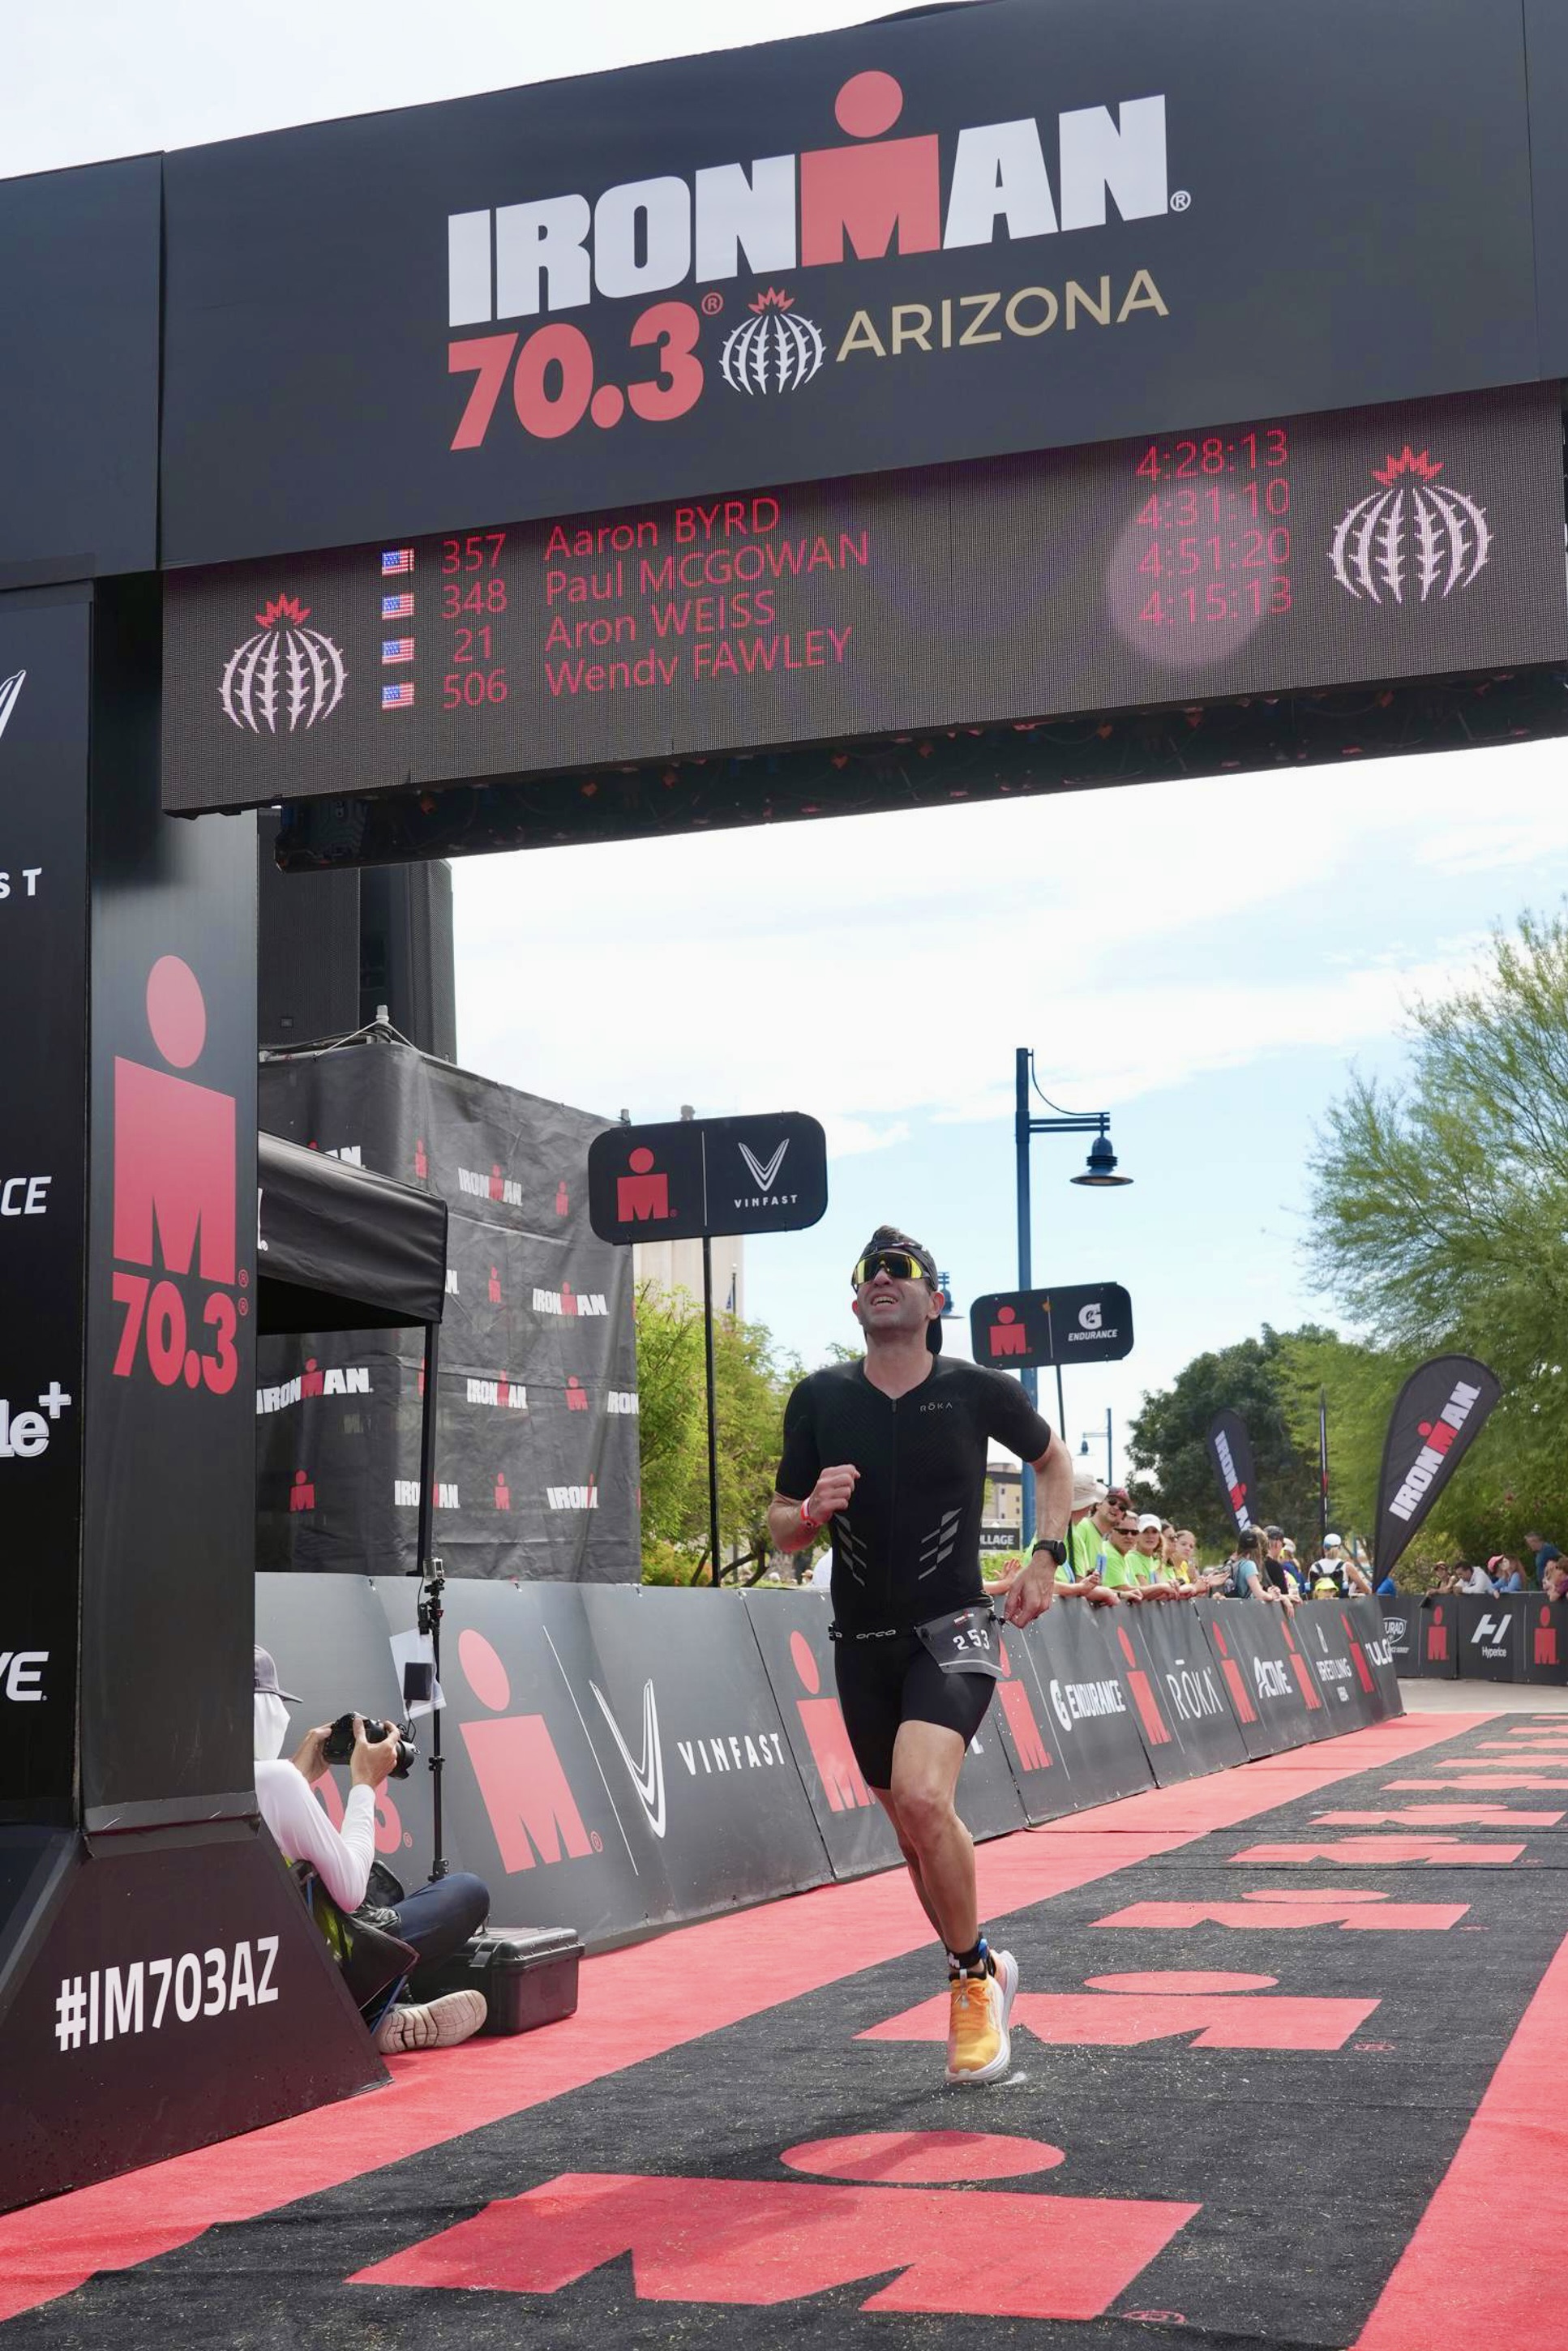 Me, about to cross the finish line at Ironman 70.3 Arizona, running on a red carpet with the M-dot logo and under the finish line arch, with a pained expression on my face.